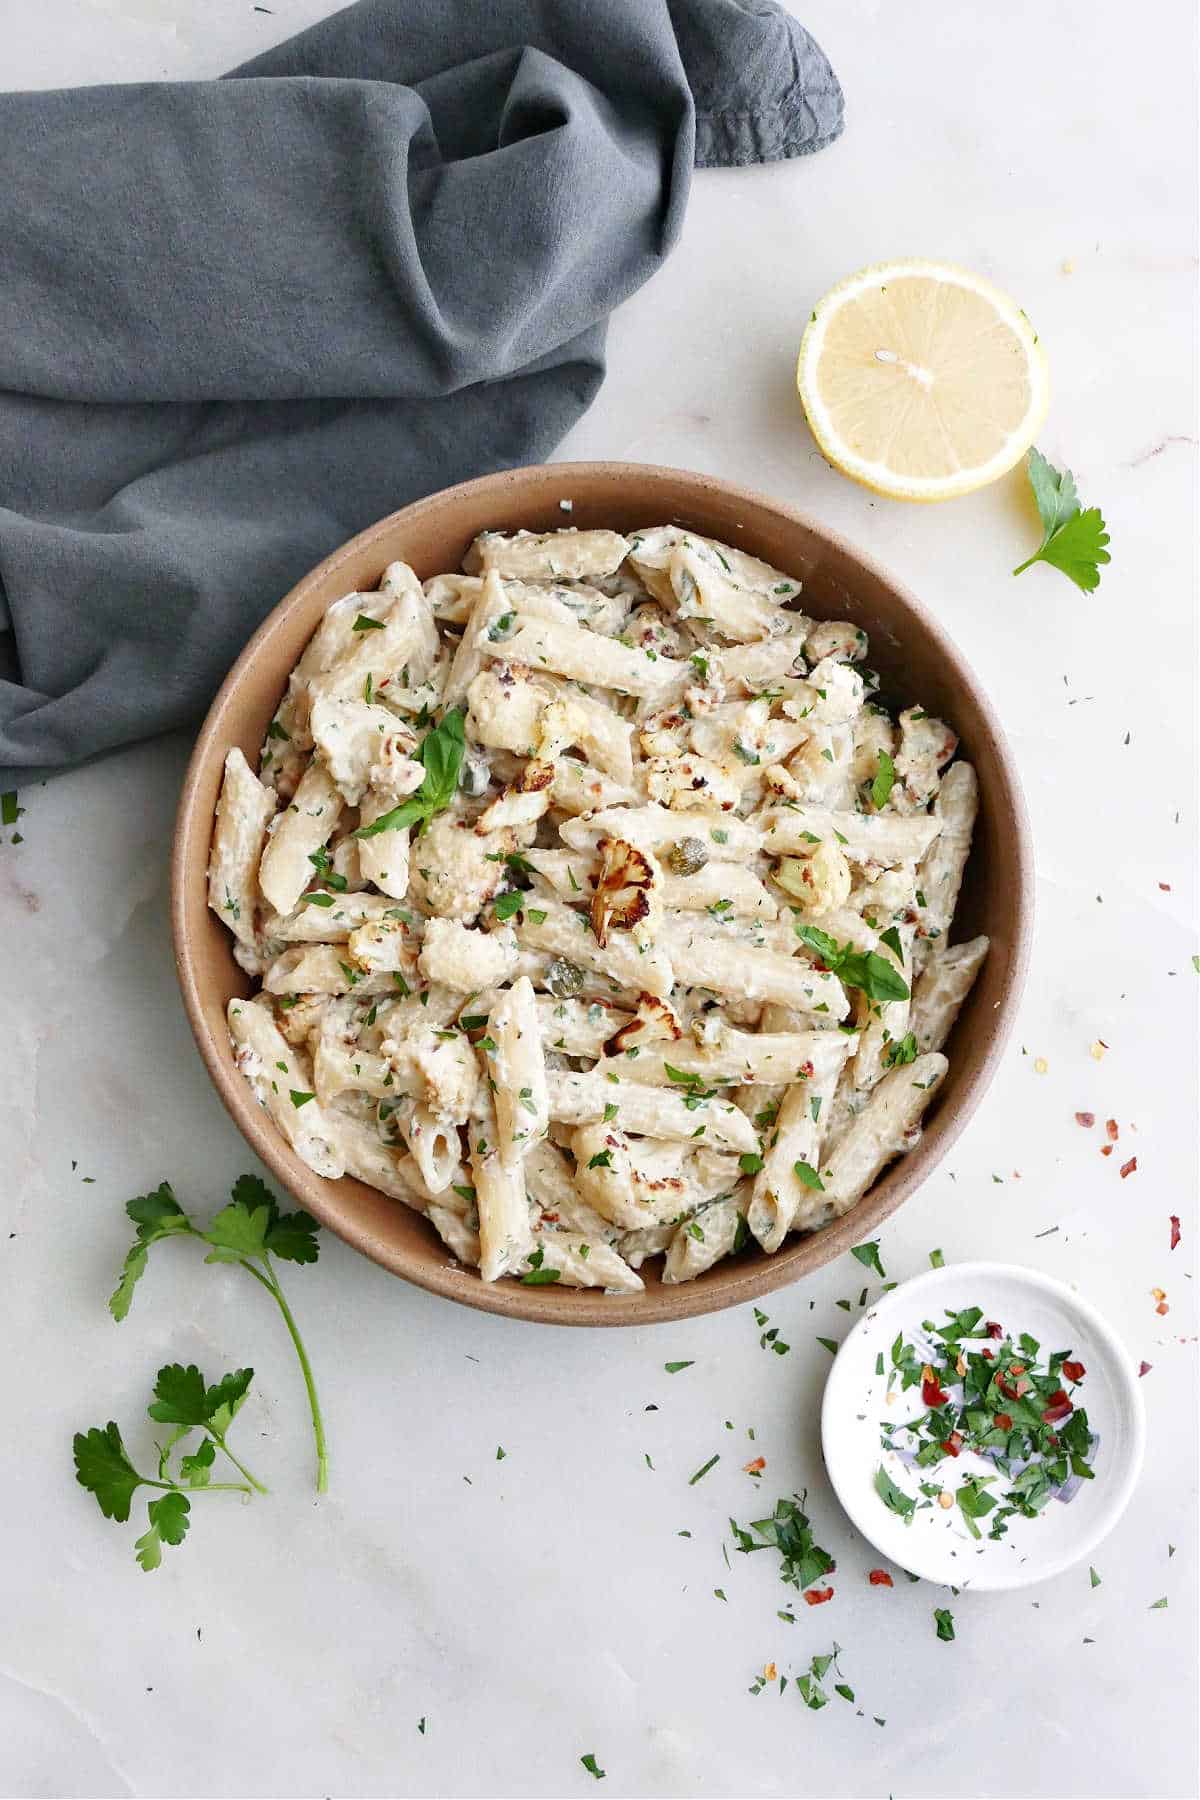 tahini pasta in a serving bowl next to herbs, lemon, and a napkin